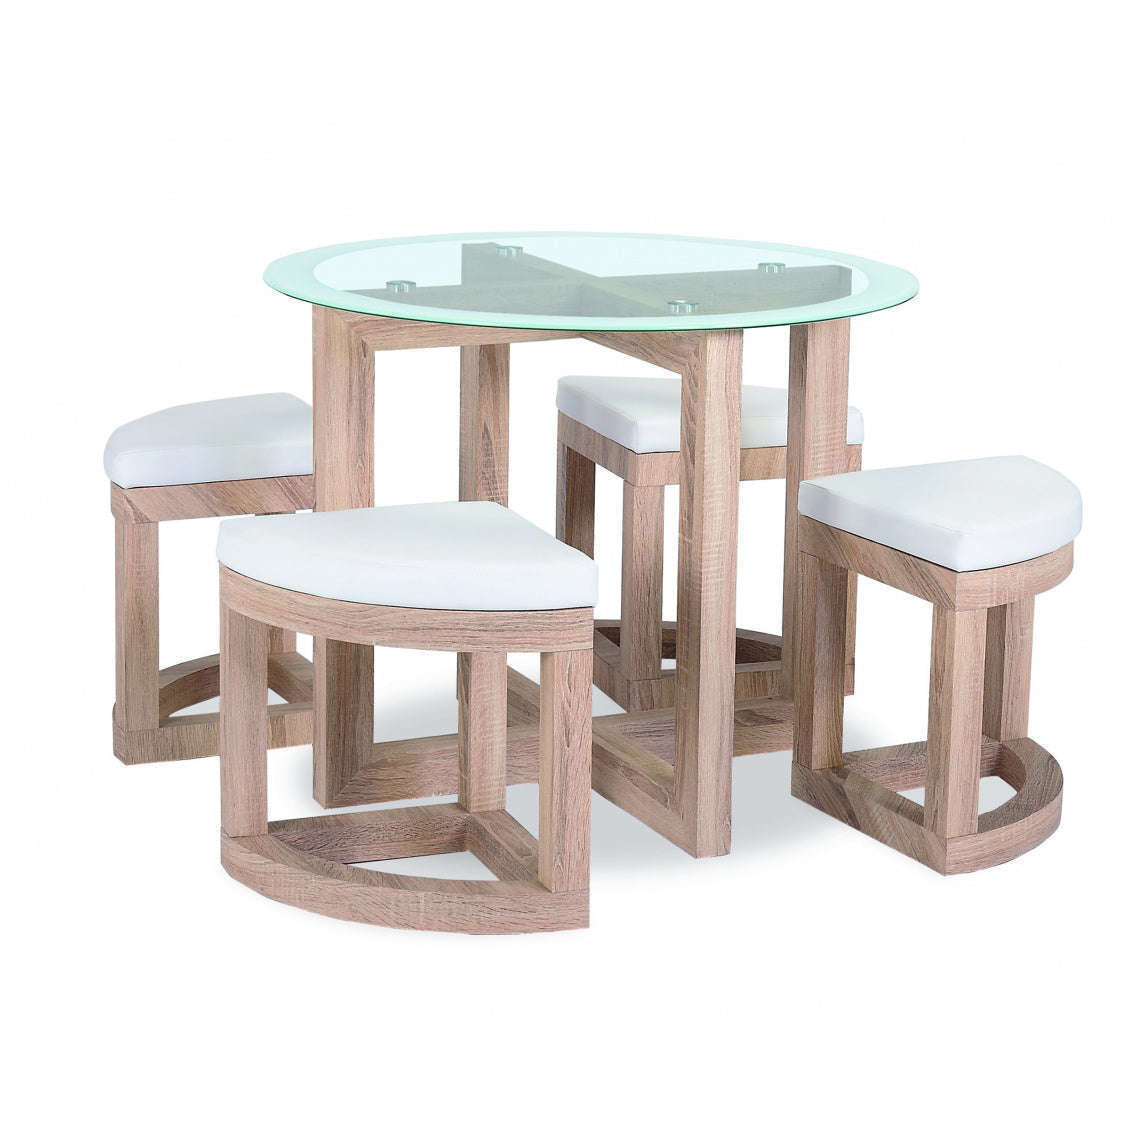 Ashpinoke:Quarry Dining Set with Glass Top and 4 Chairs,Dining Sets,Heartlands Furniture